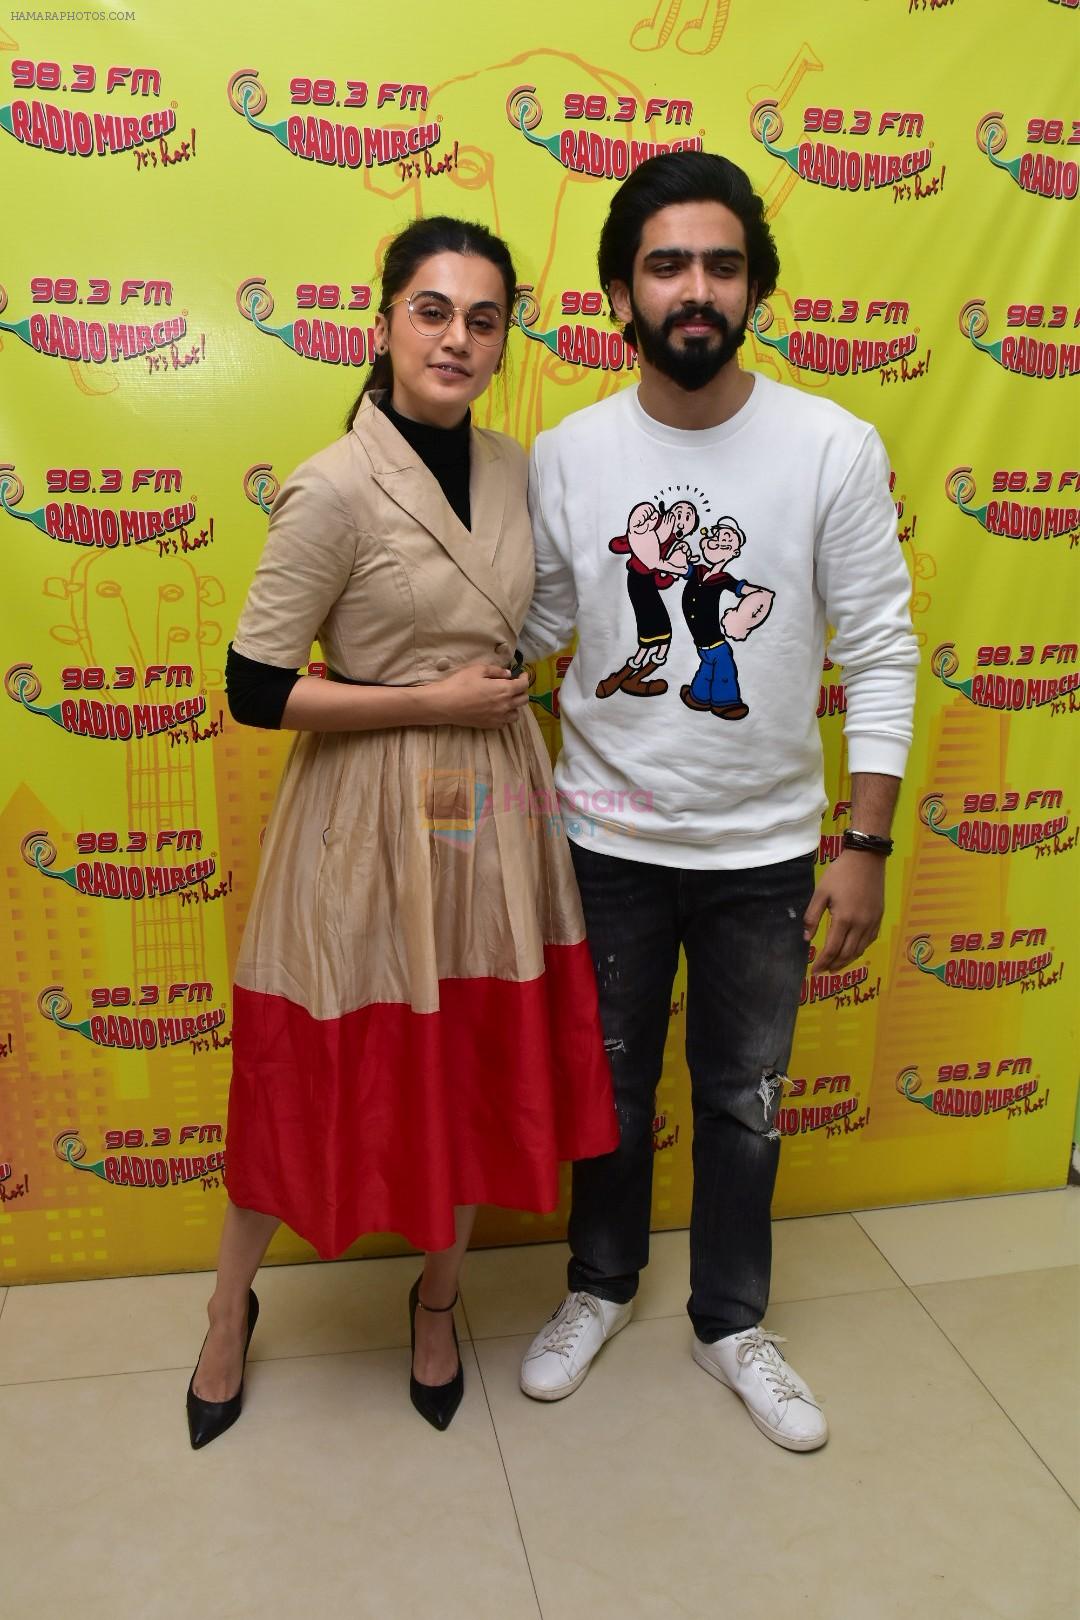 Taapsee Pannu, Singer Amaal Malik at the Song Launch Of Movie Badla on 20th Feb 2019